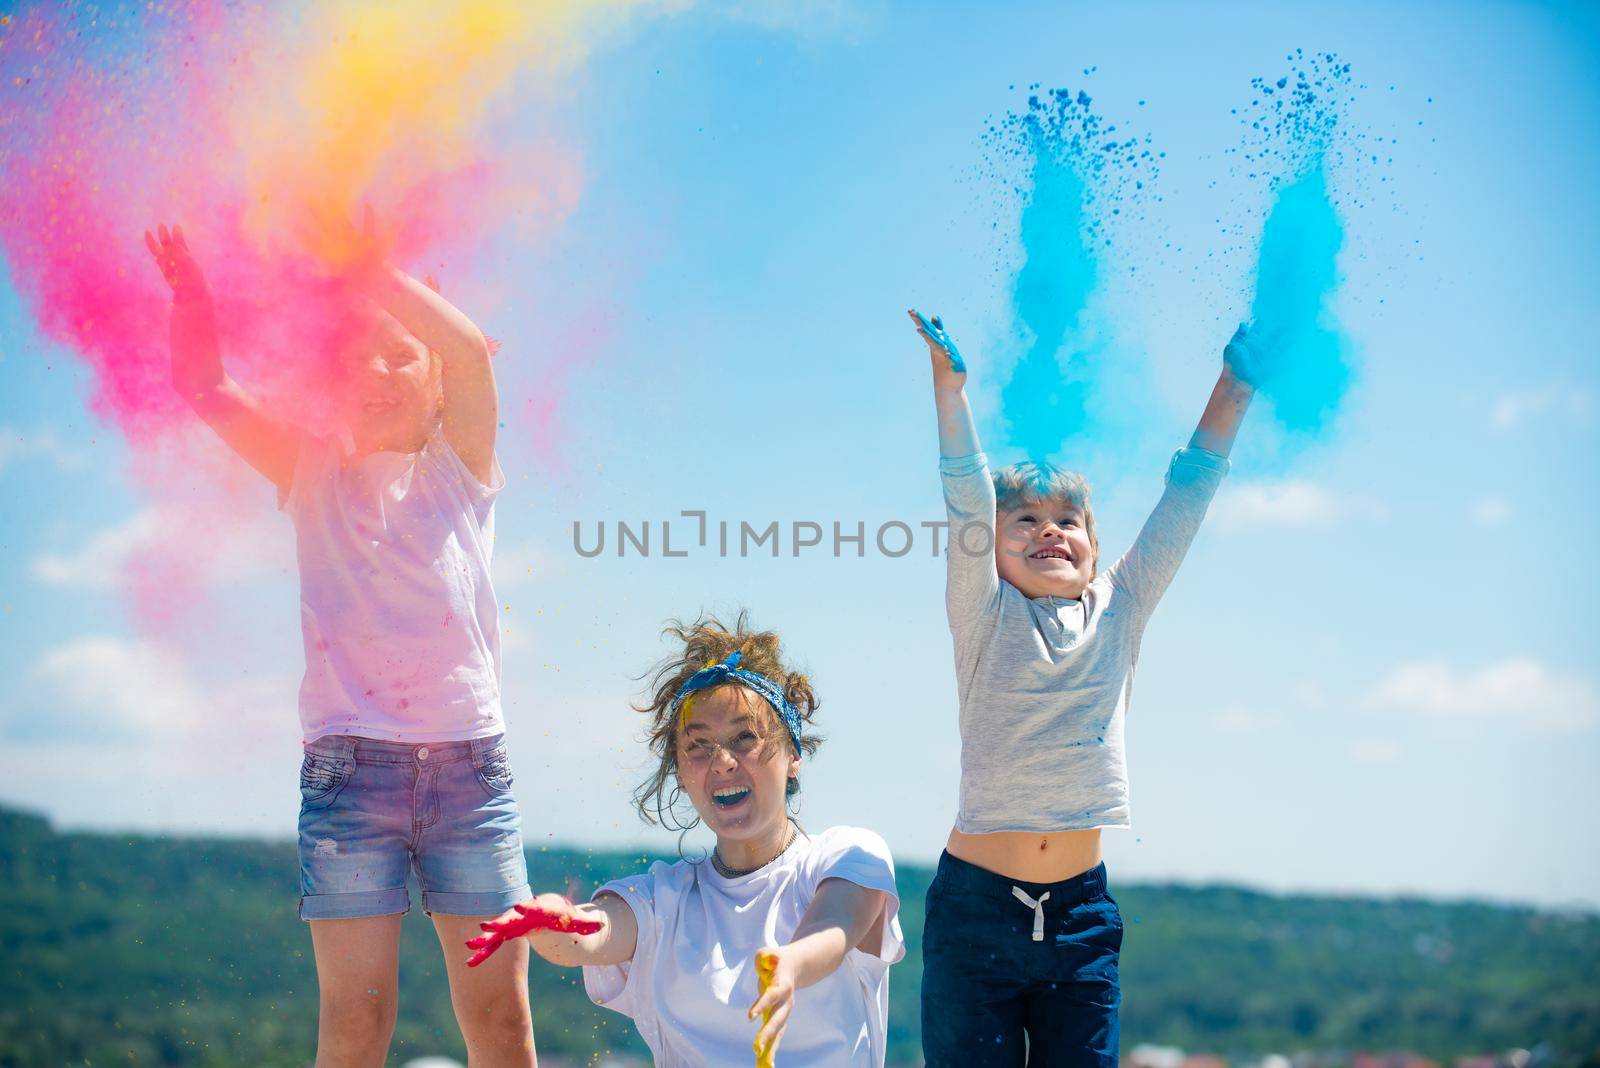 Excited children painted in the colors of Holi festival. Kids splashing colorful paint